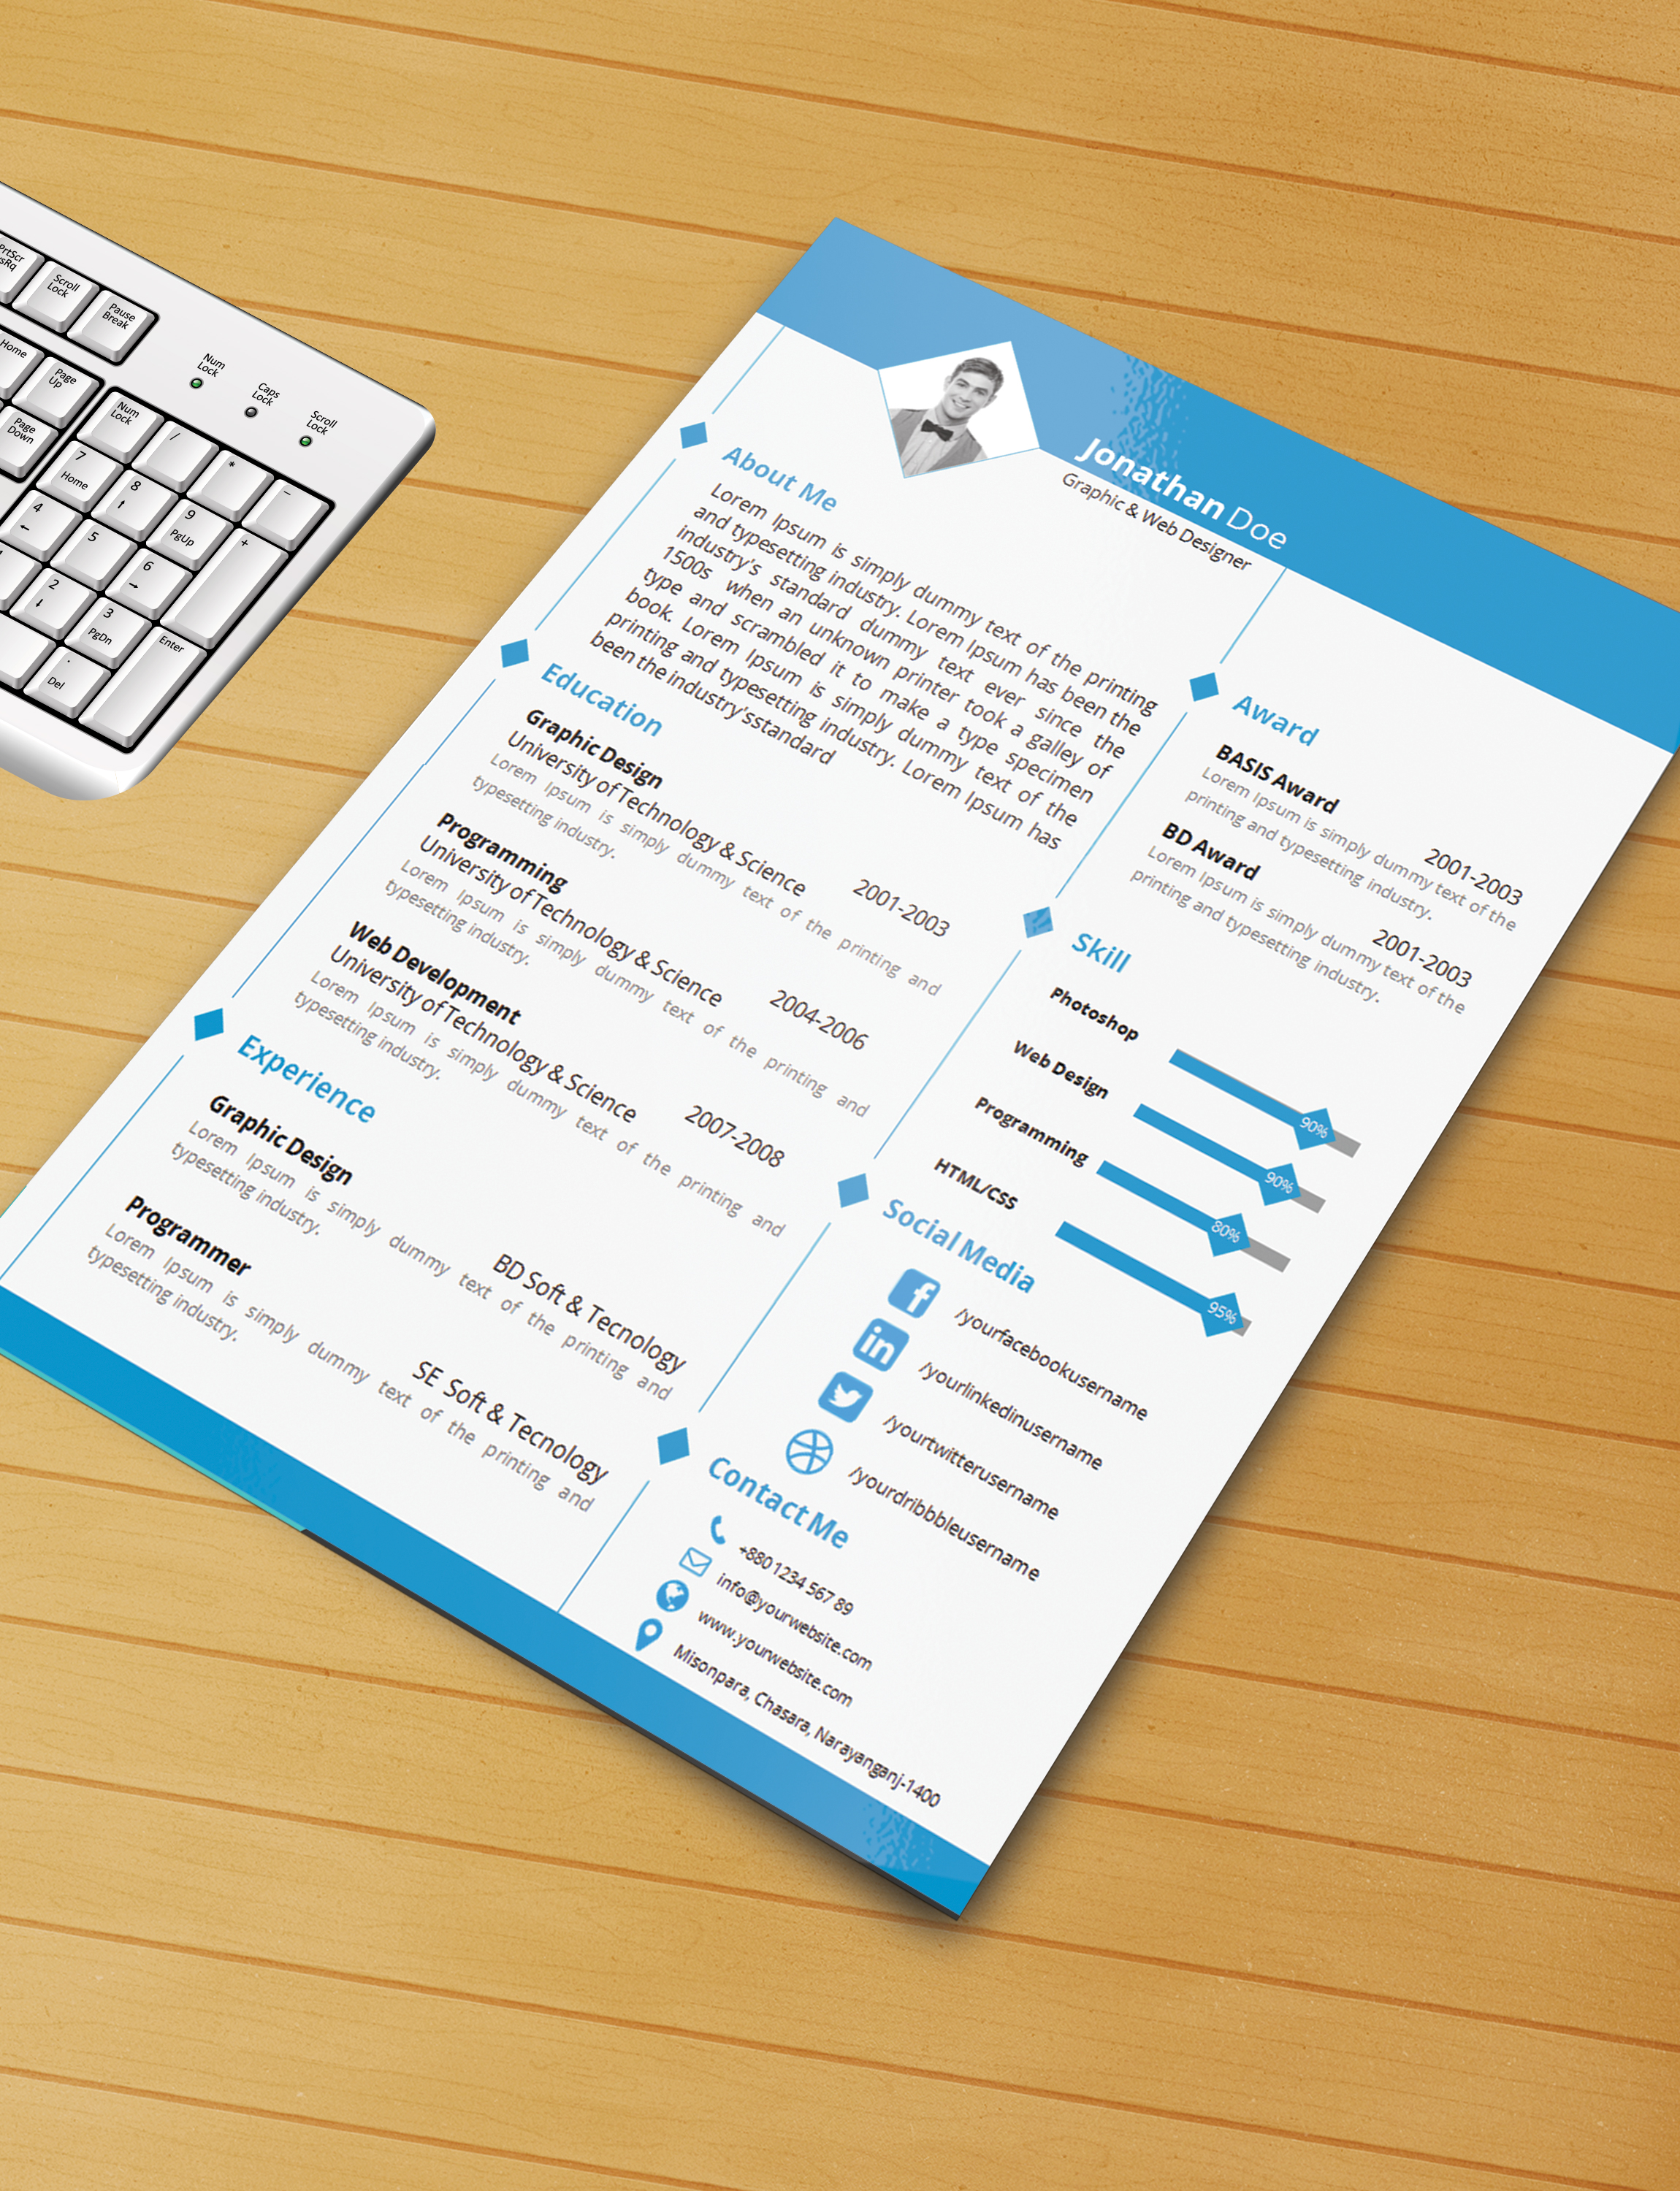 Free Resume Templates For Word D839paa Ca4ff93f 5ab1 40c8 B8e9 5f0e14702163 free resume templates for word|wikiresume.com